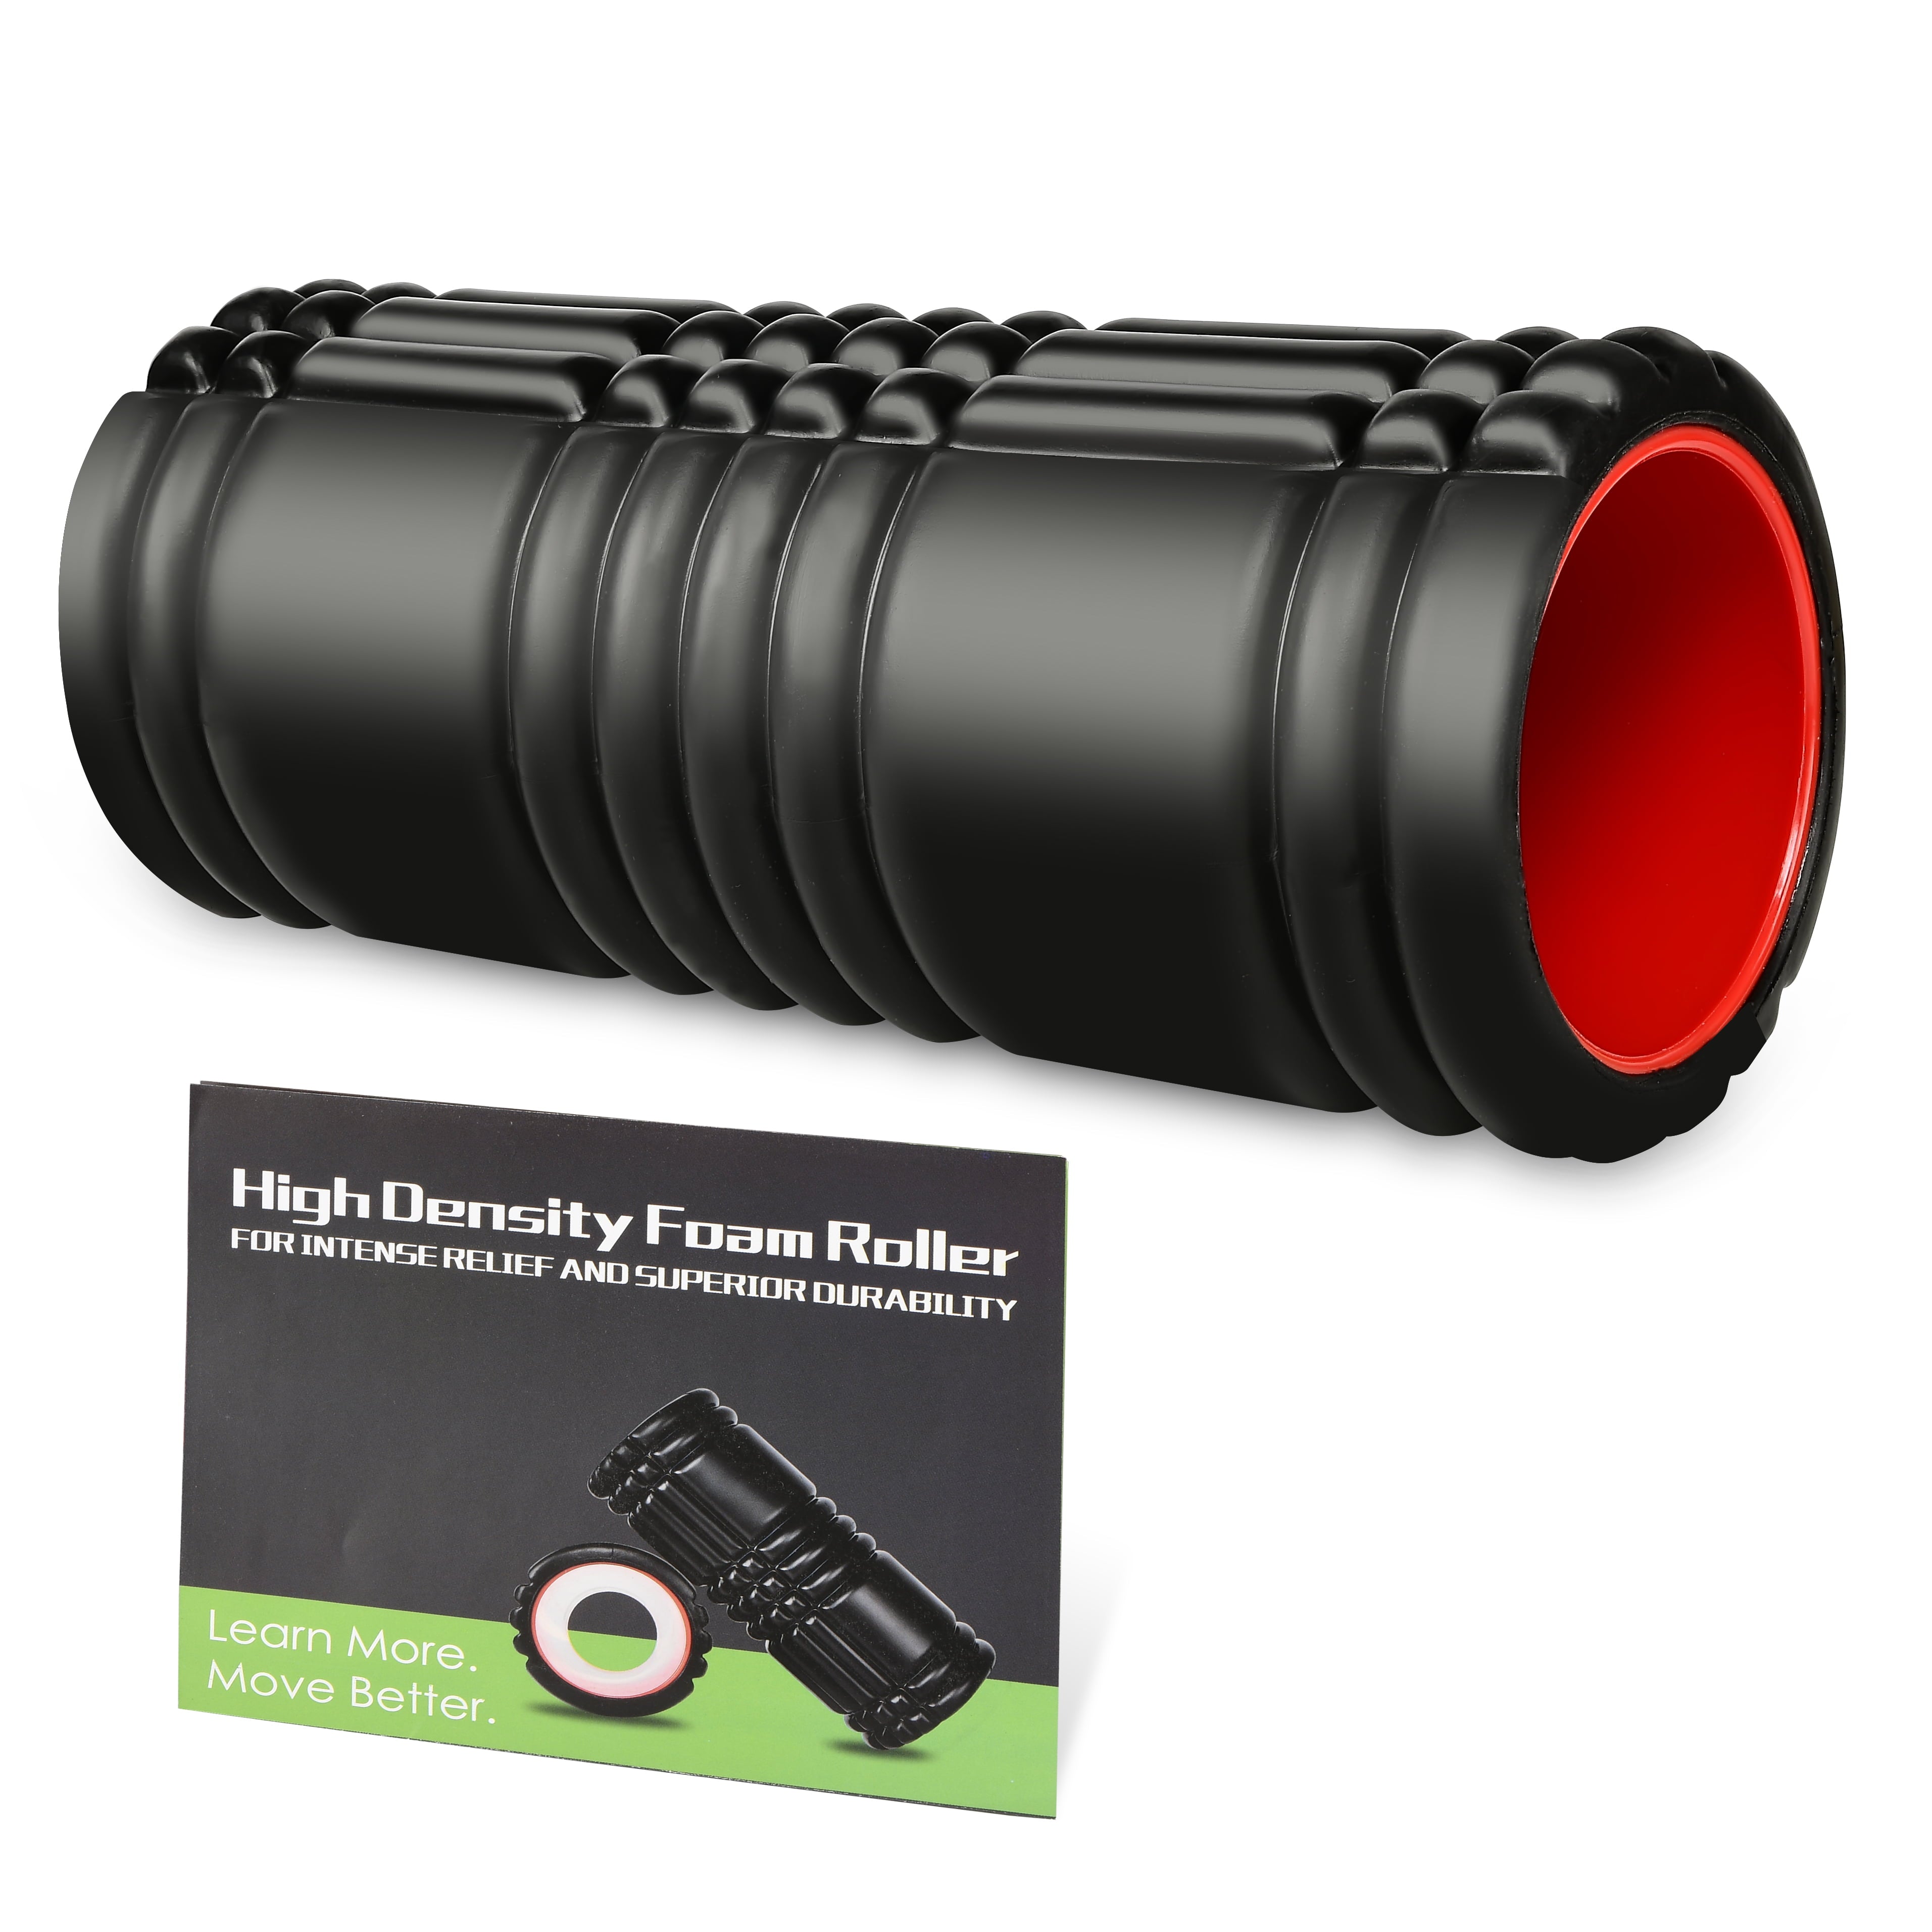 Muscle Foam Roller Manipulates Soft Tissue -Medium Density Deep Tissue Textured Massager for Muscle Massage and Myofascial Trigger Point Release